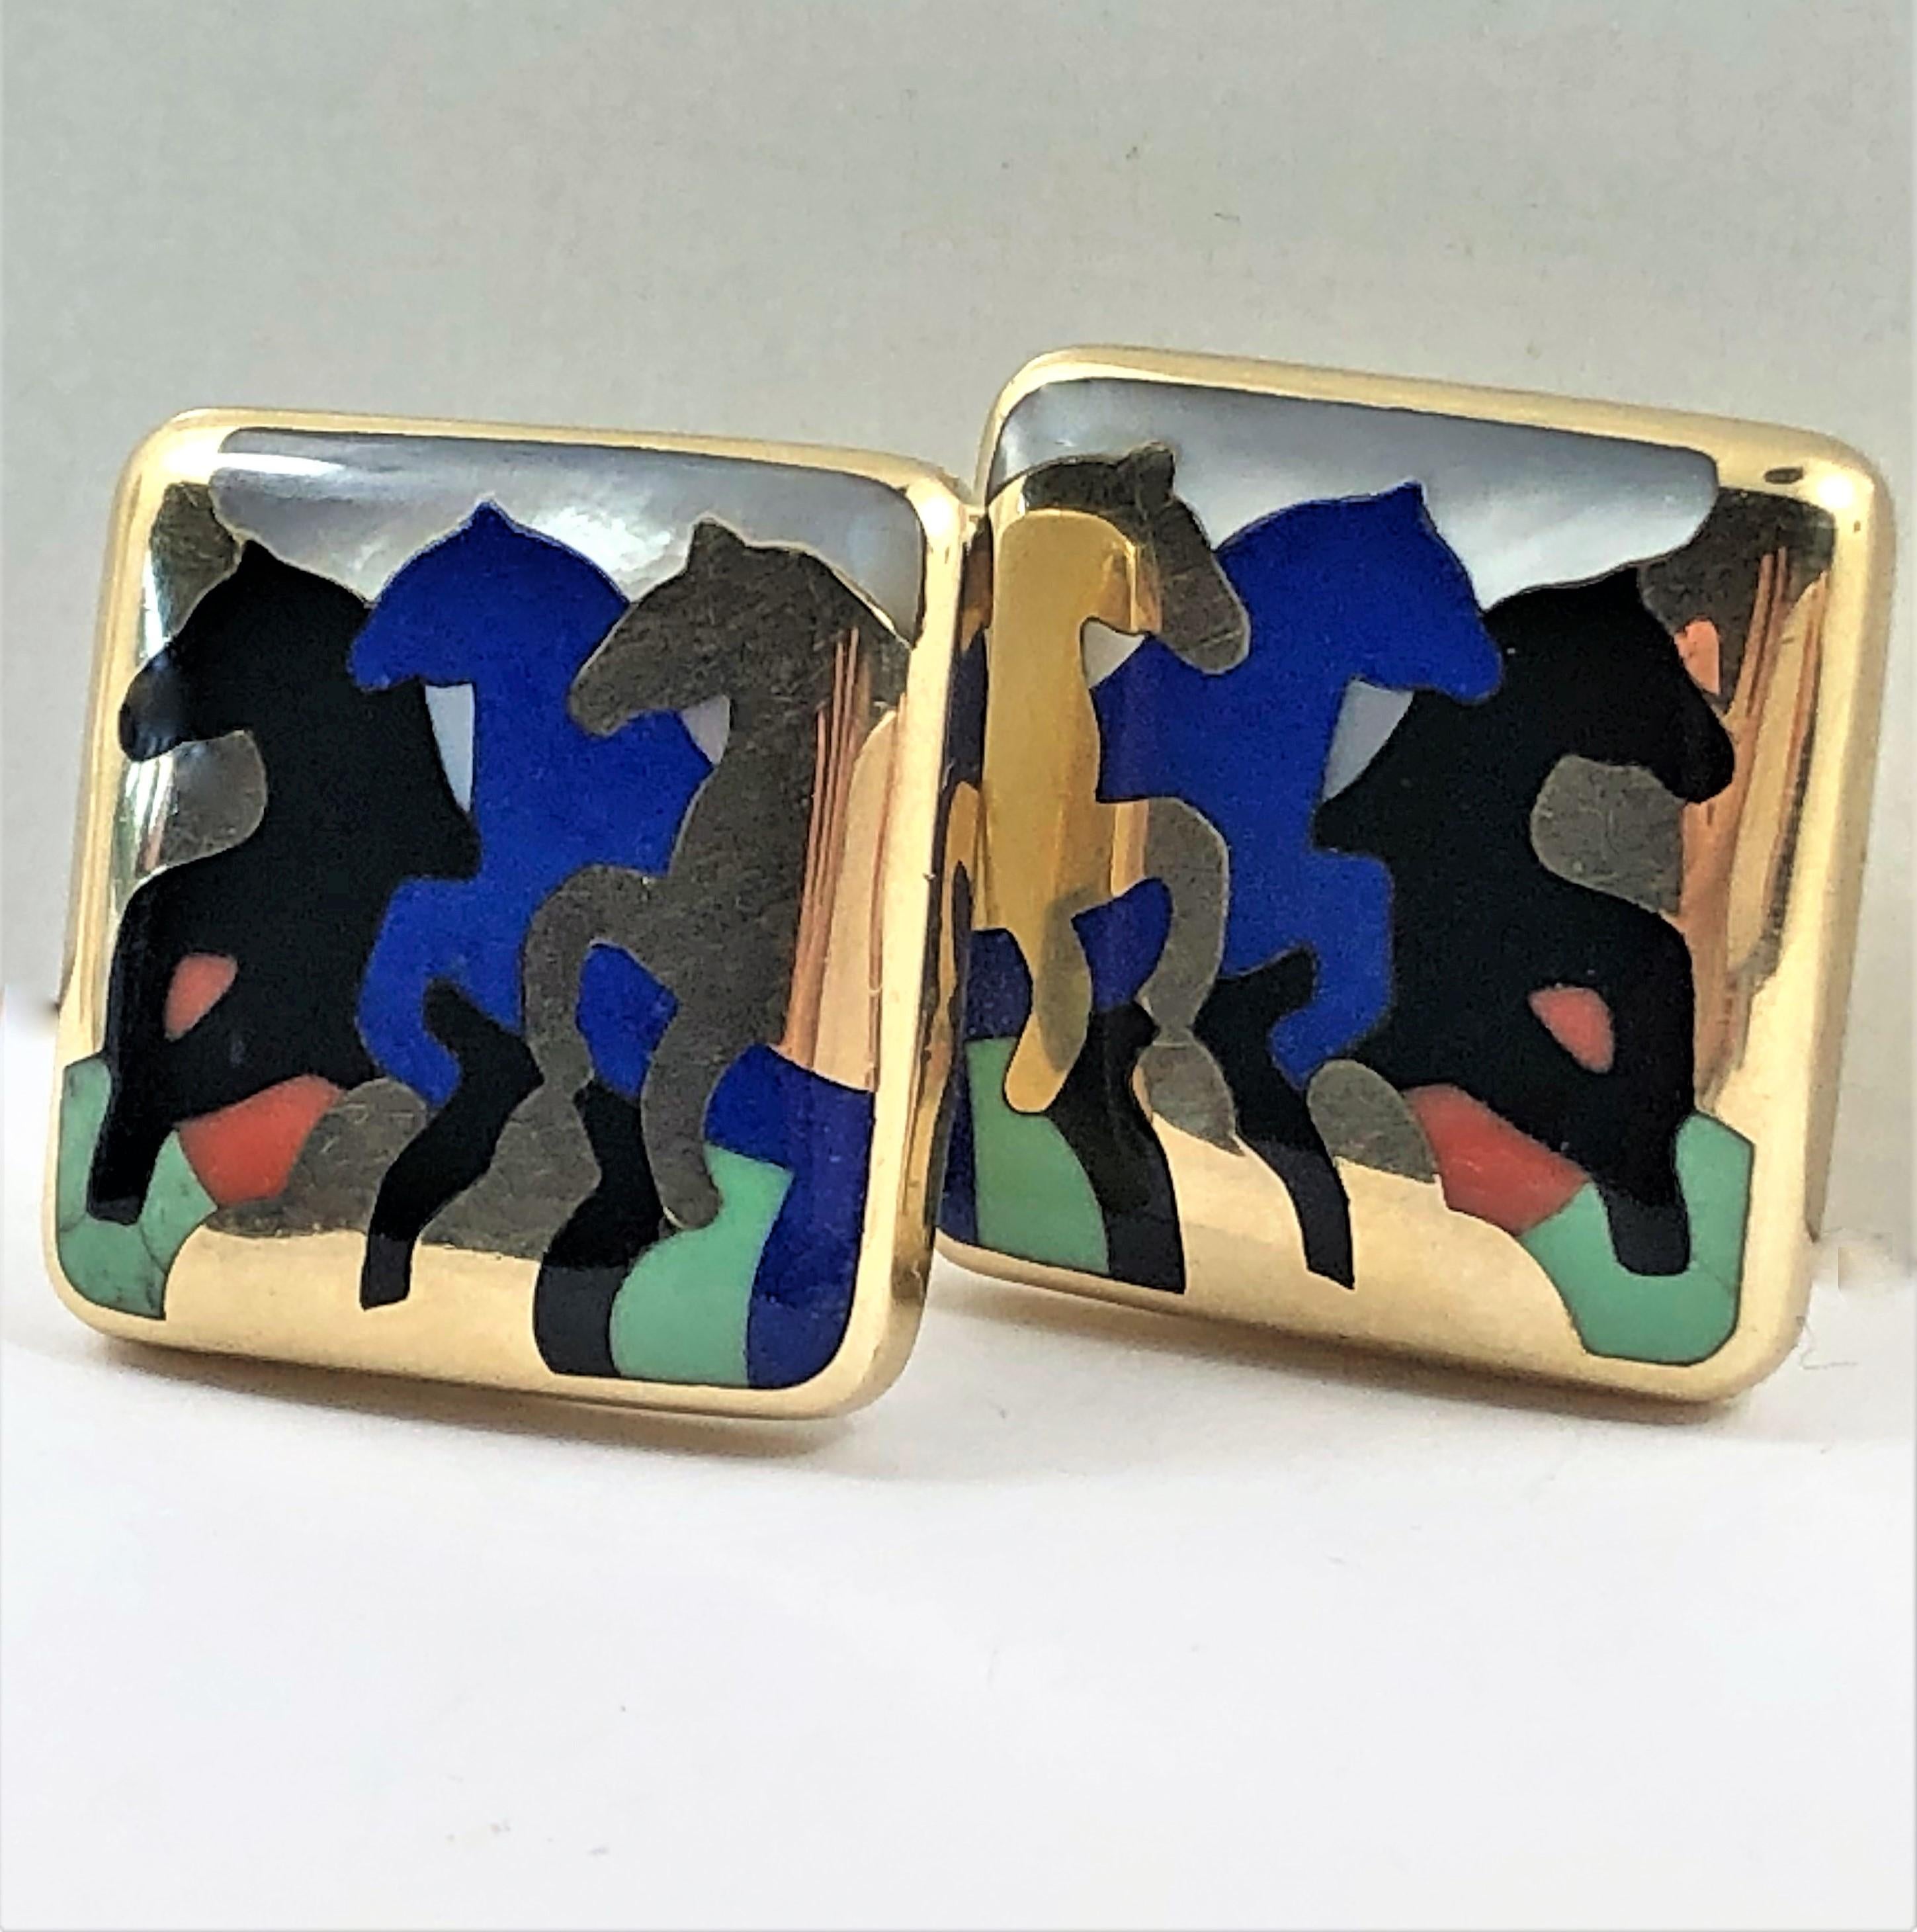 Made by Asch Grossbardt in 14K Yellow Gold, inlaid with hand cut and polished lapis lazuli, mother of pearl, aventurine, coral and onyx. Measuring 1 inch by 1 inch. With omega backs and posts. Gross weight 24 grams. Marks: AG Asch Grossbardt 14K.
